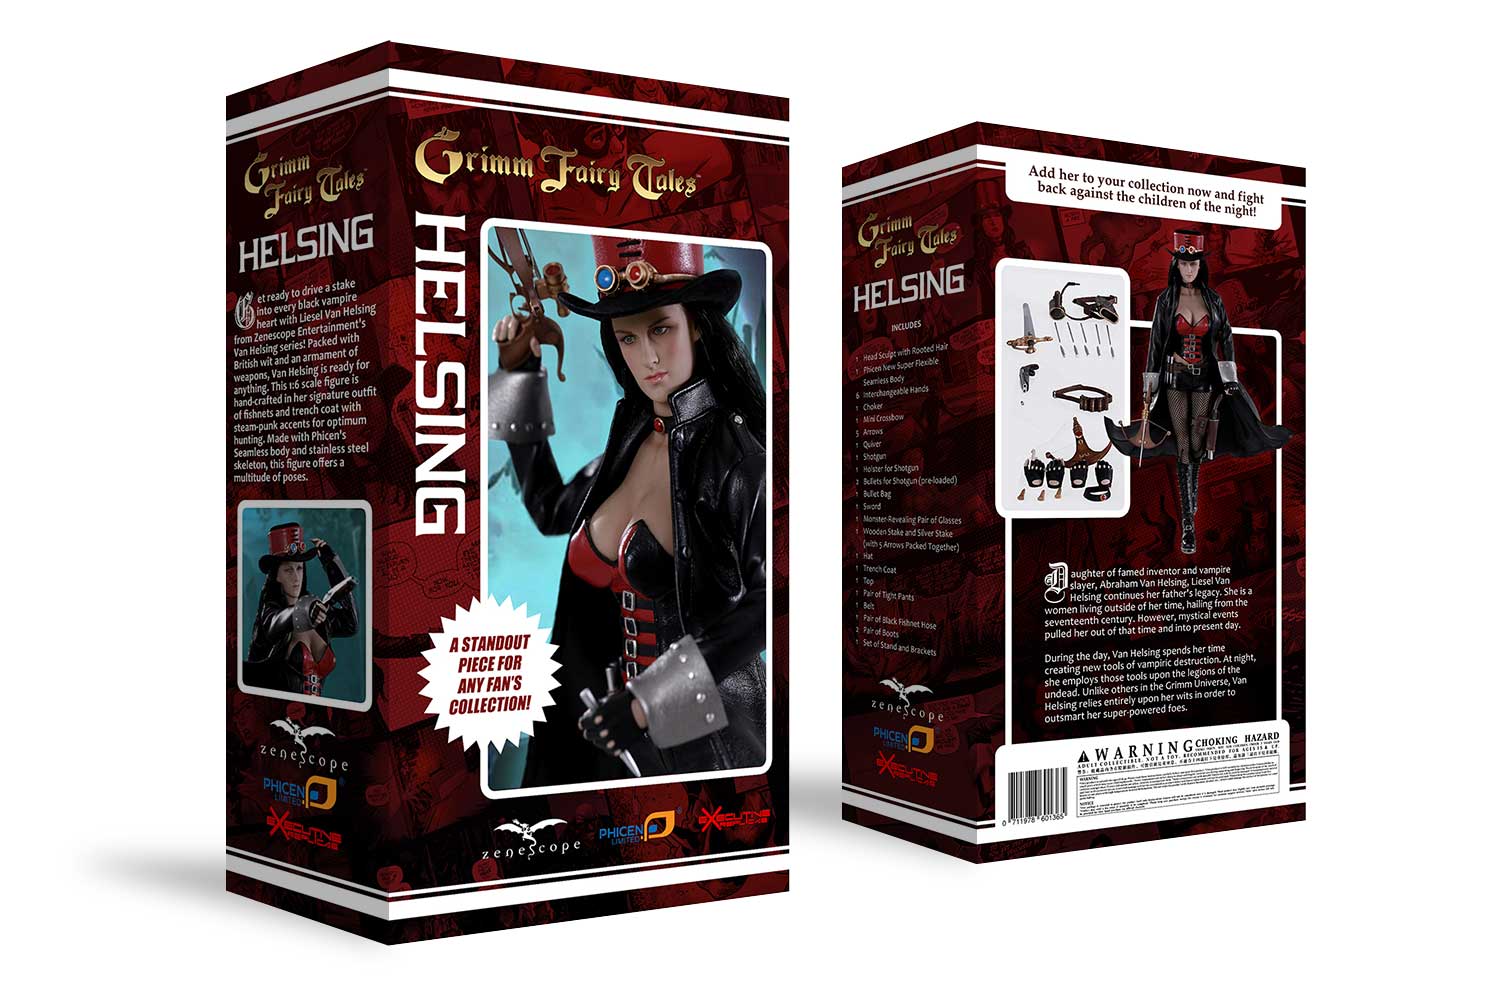 Helsing Action Figure - Featured